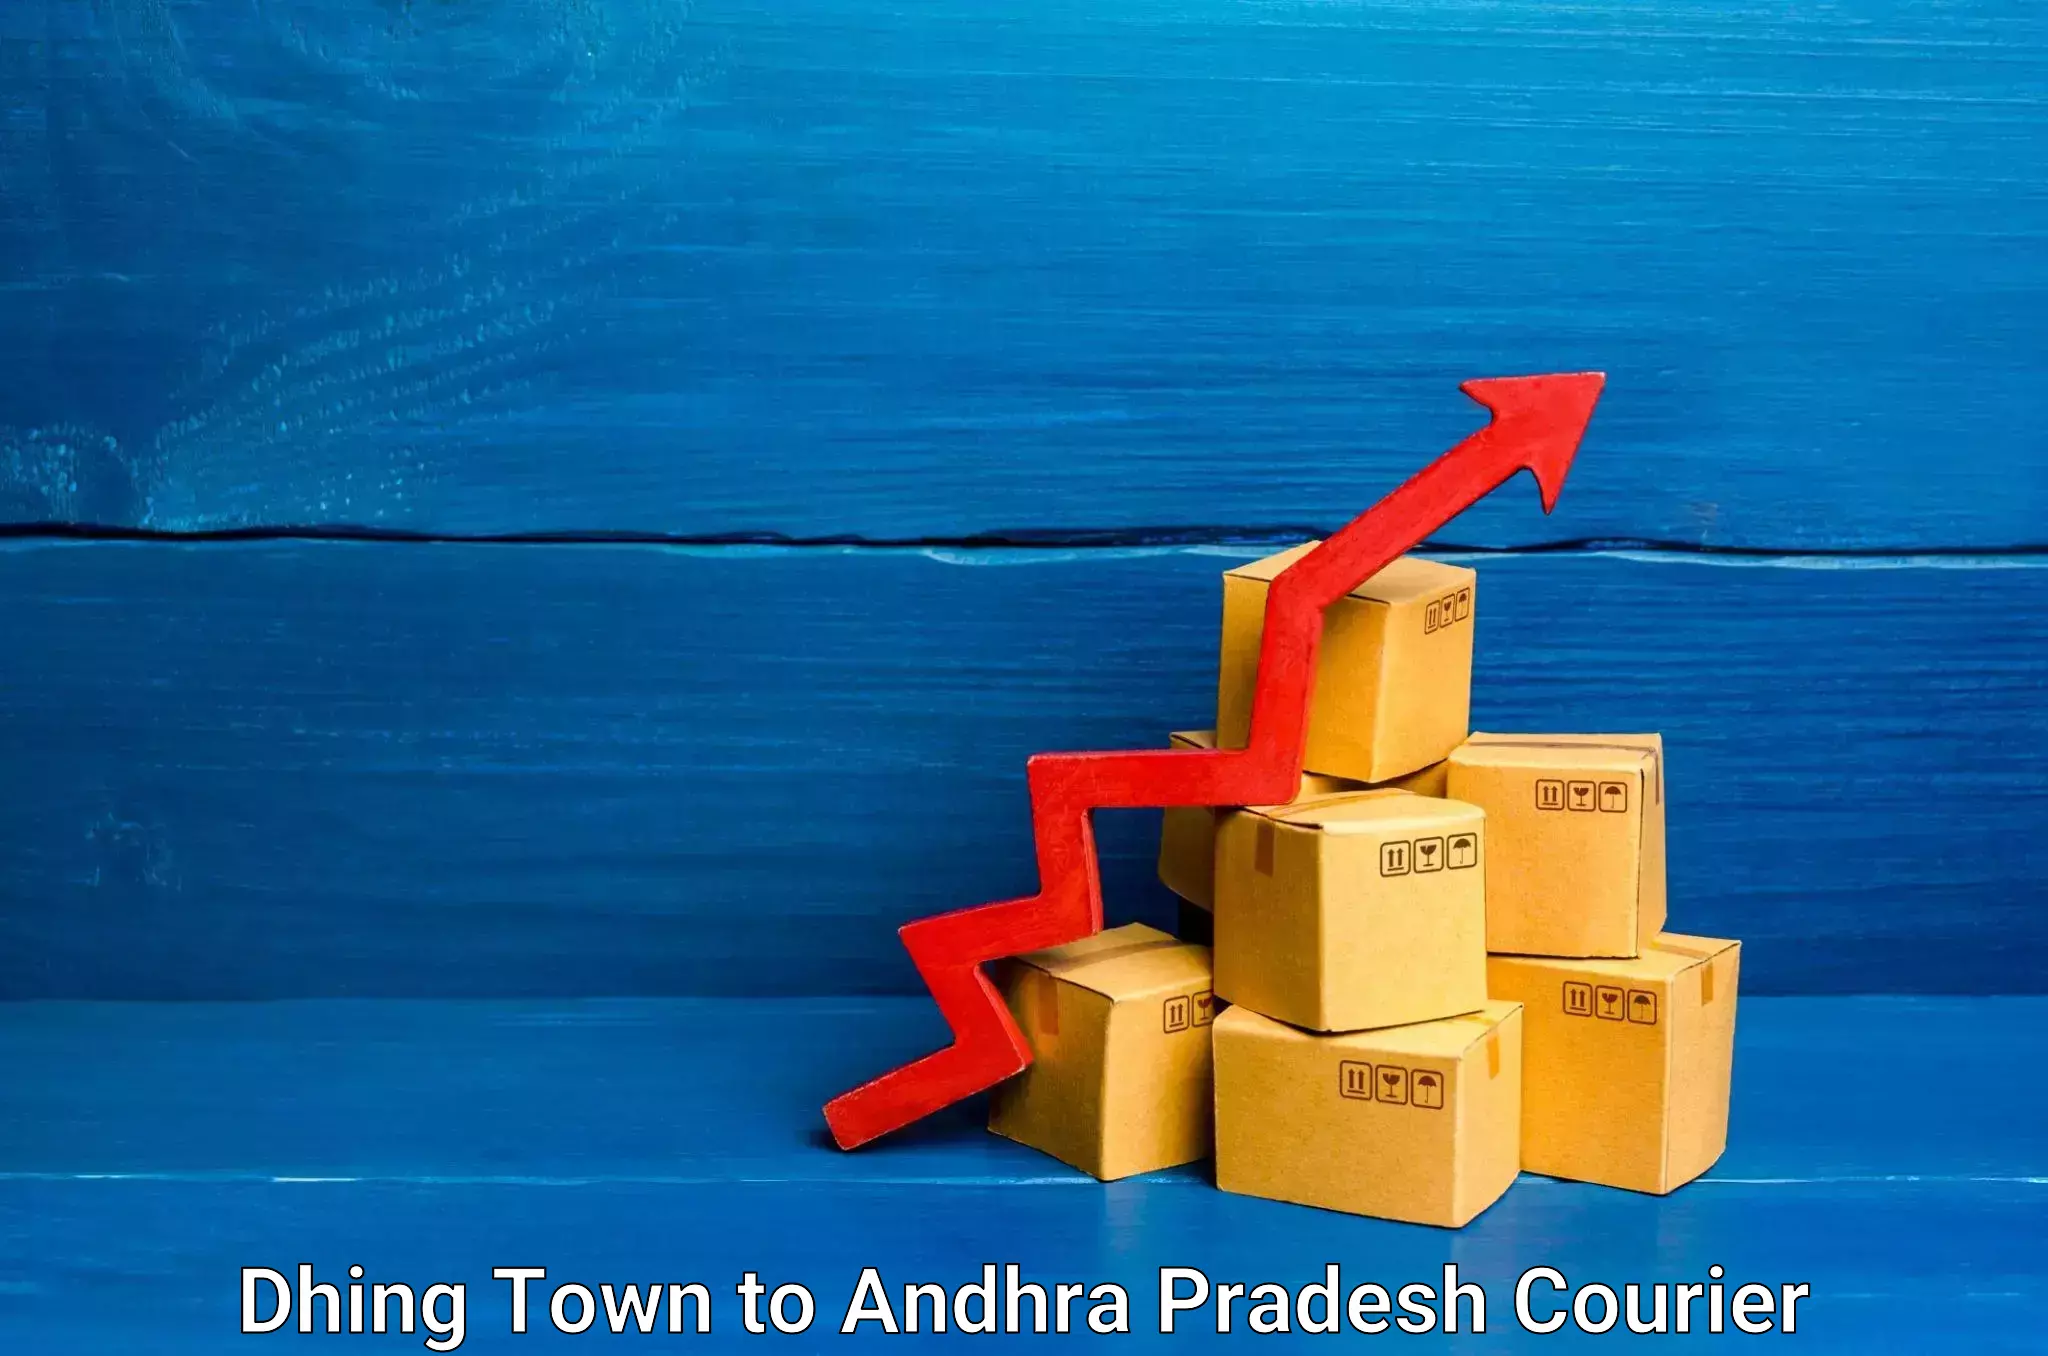 Courier rate comparison Dhing Town to Polavaram